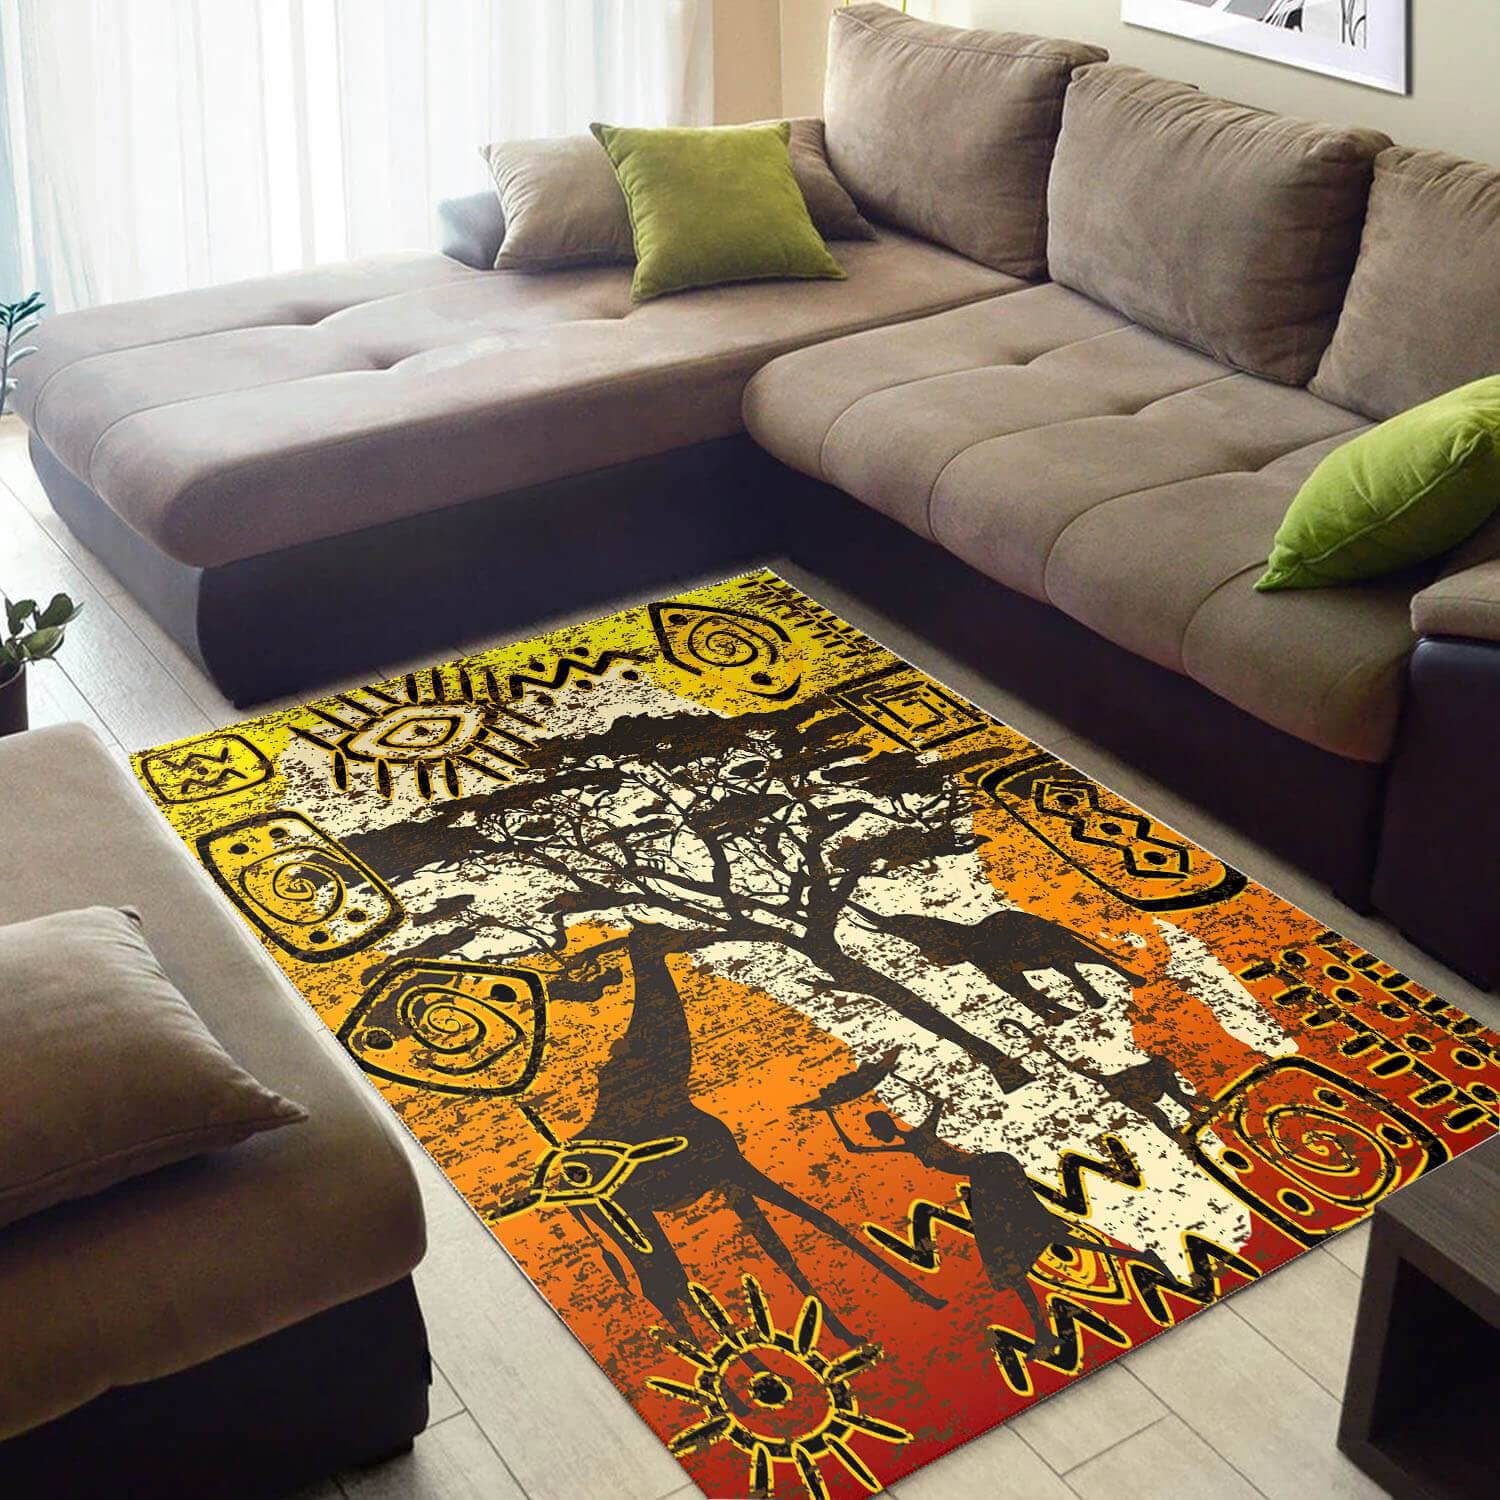 Trendy African Retro American Black Art Afrocentric Style Area Room Rug